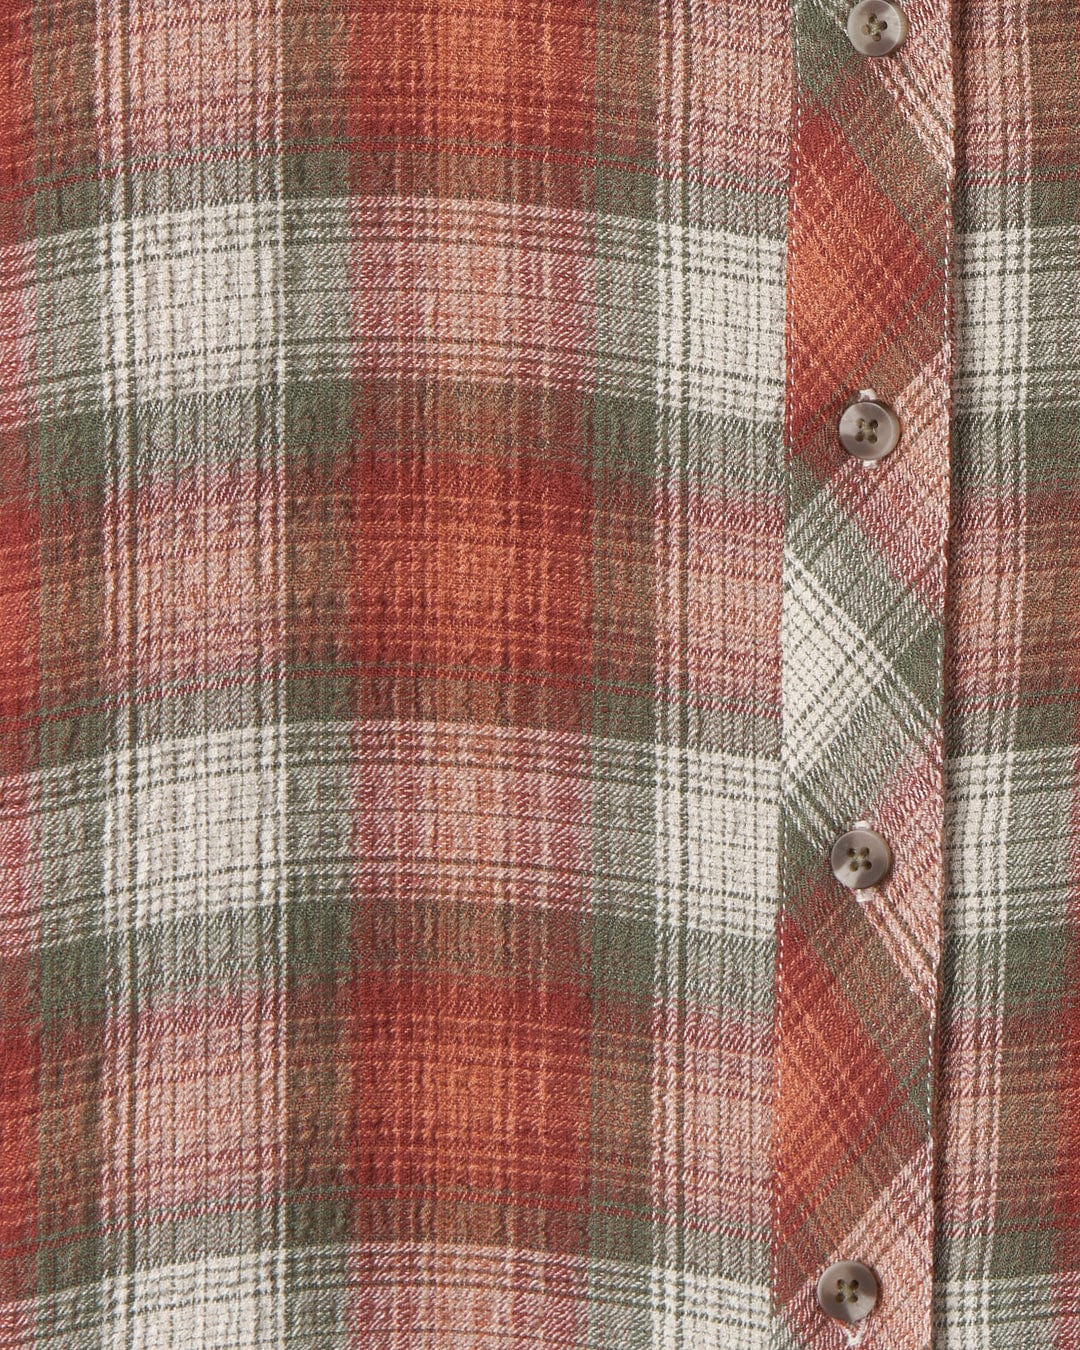 Close-up of a Rosalin long sleeve shirt from Saltrock in shades of orange, white, and green, featuring a row of contrasting buttons.